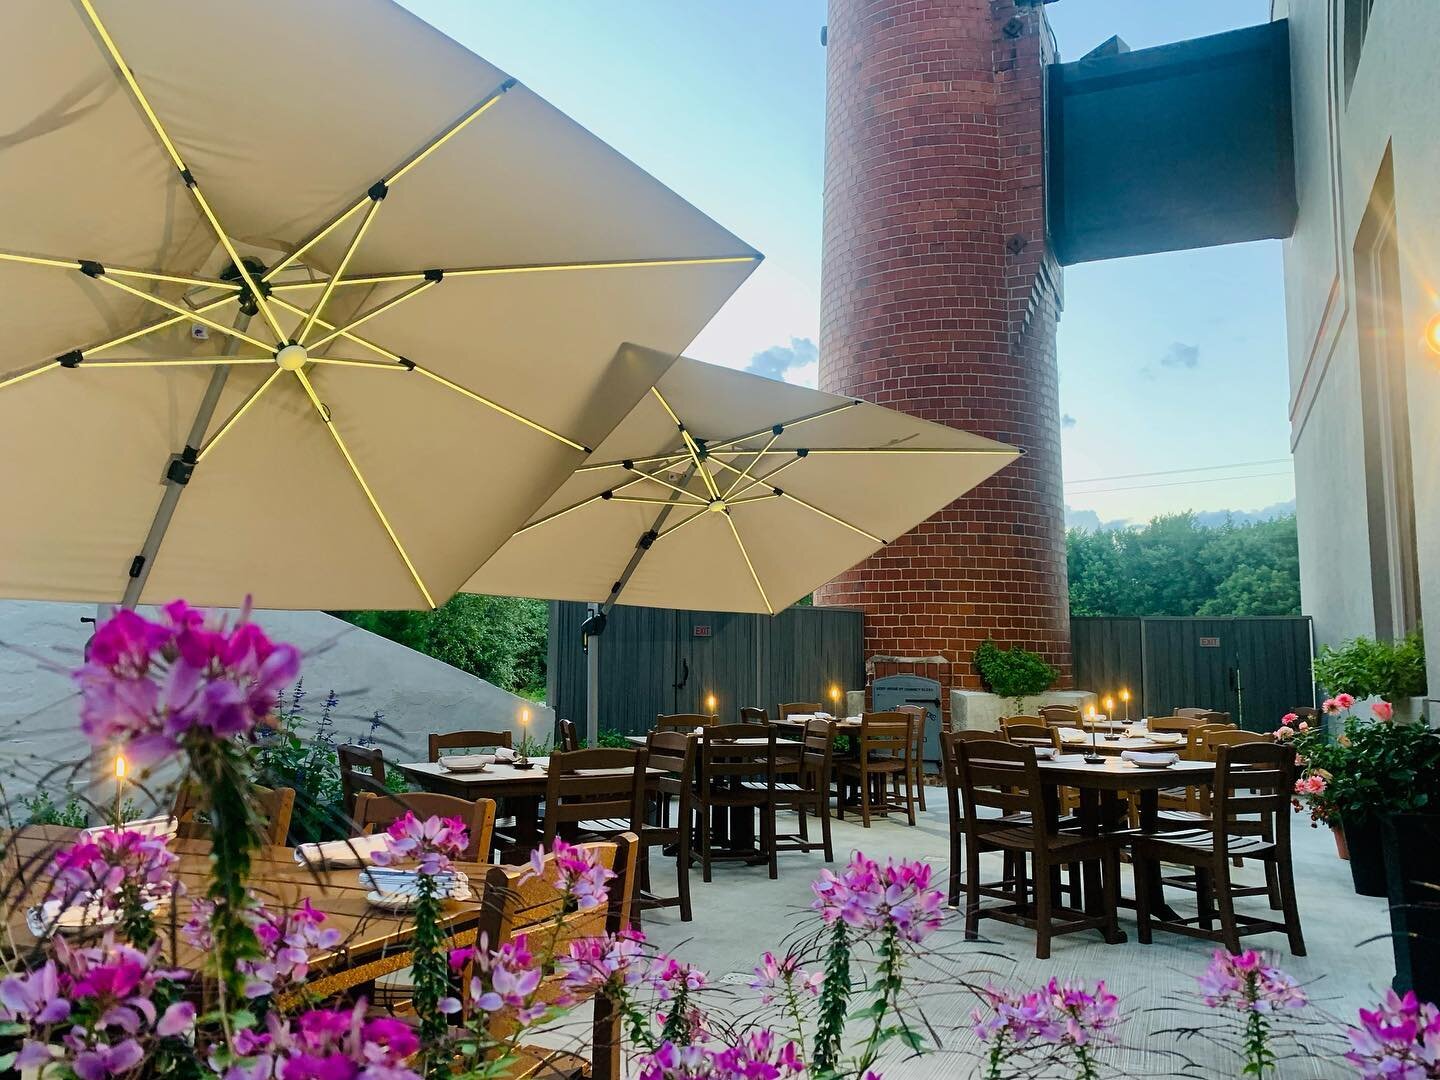 Warm Summer nights call for delicious meals and cold drinks in the great outdoors. We cherish these hot and breezy nights, and our brand new patio is just picture perfect for soaking up these beautiful July evenings!

🍹 4-9 tonight, see you soon!!